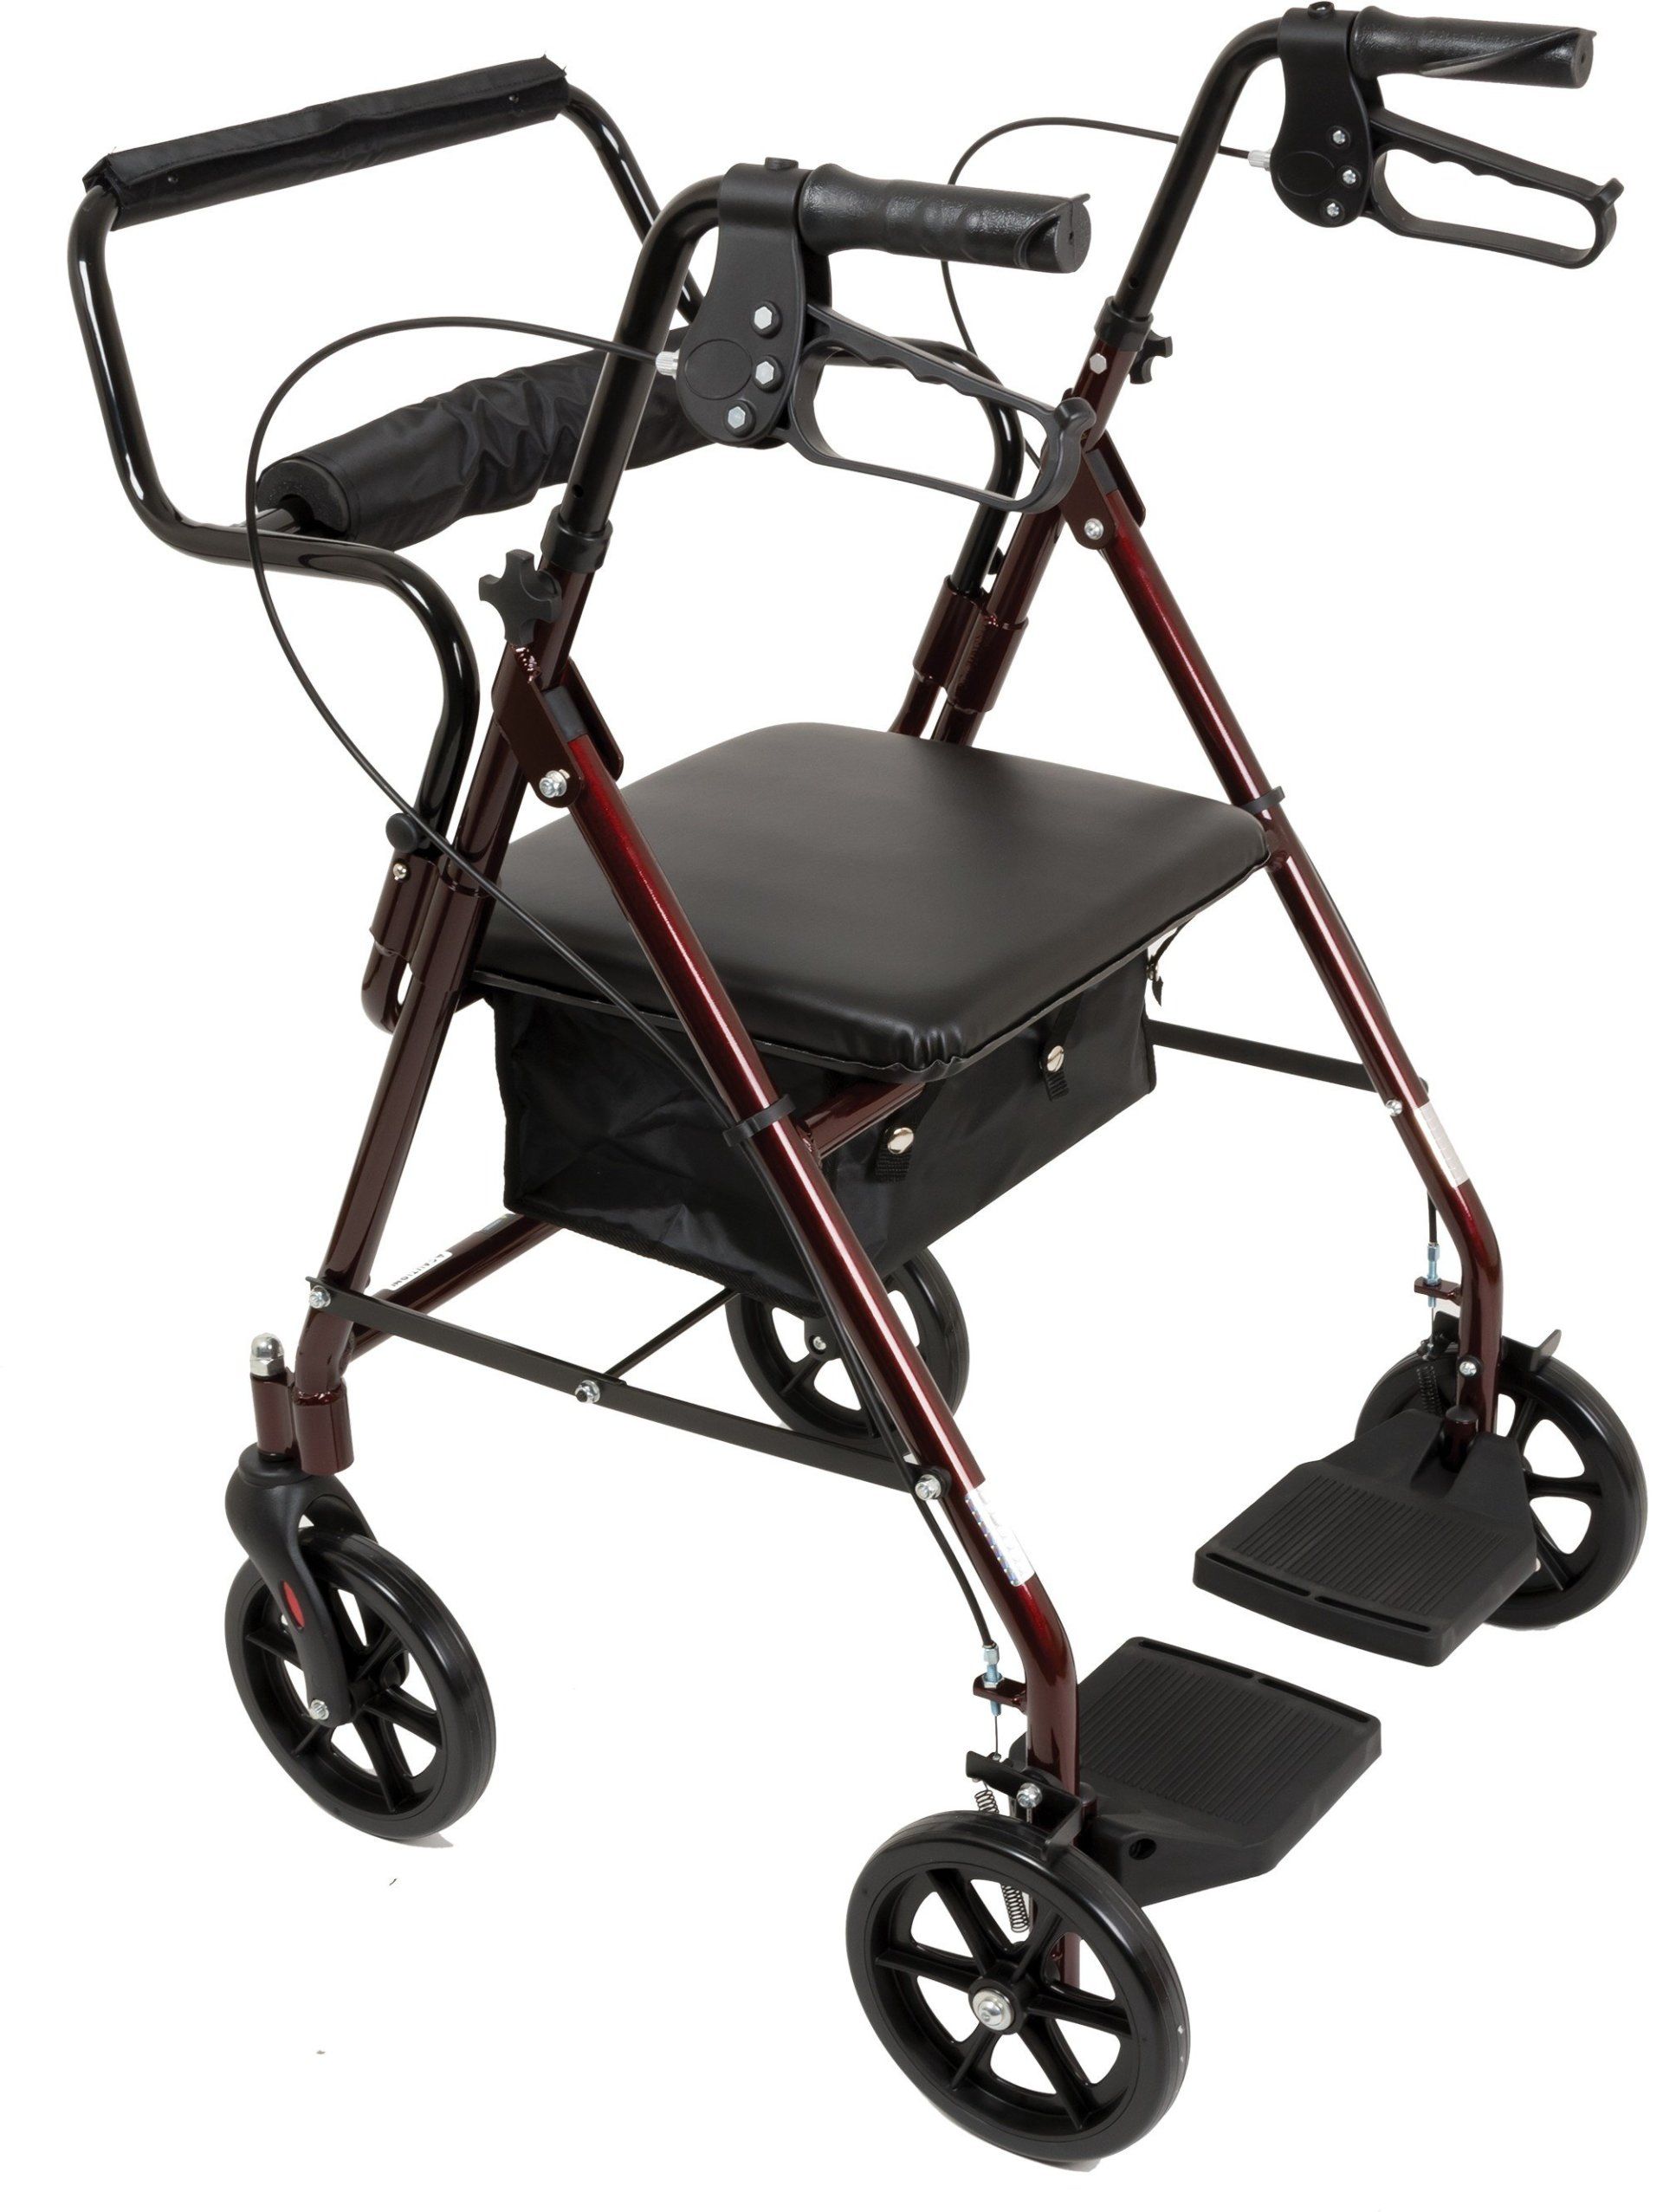 Companion - Transport/Rollator, combines the features of a rollator with a transport chair all in one unit.